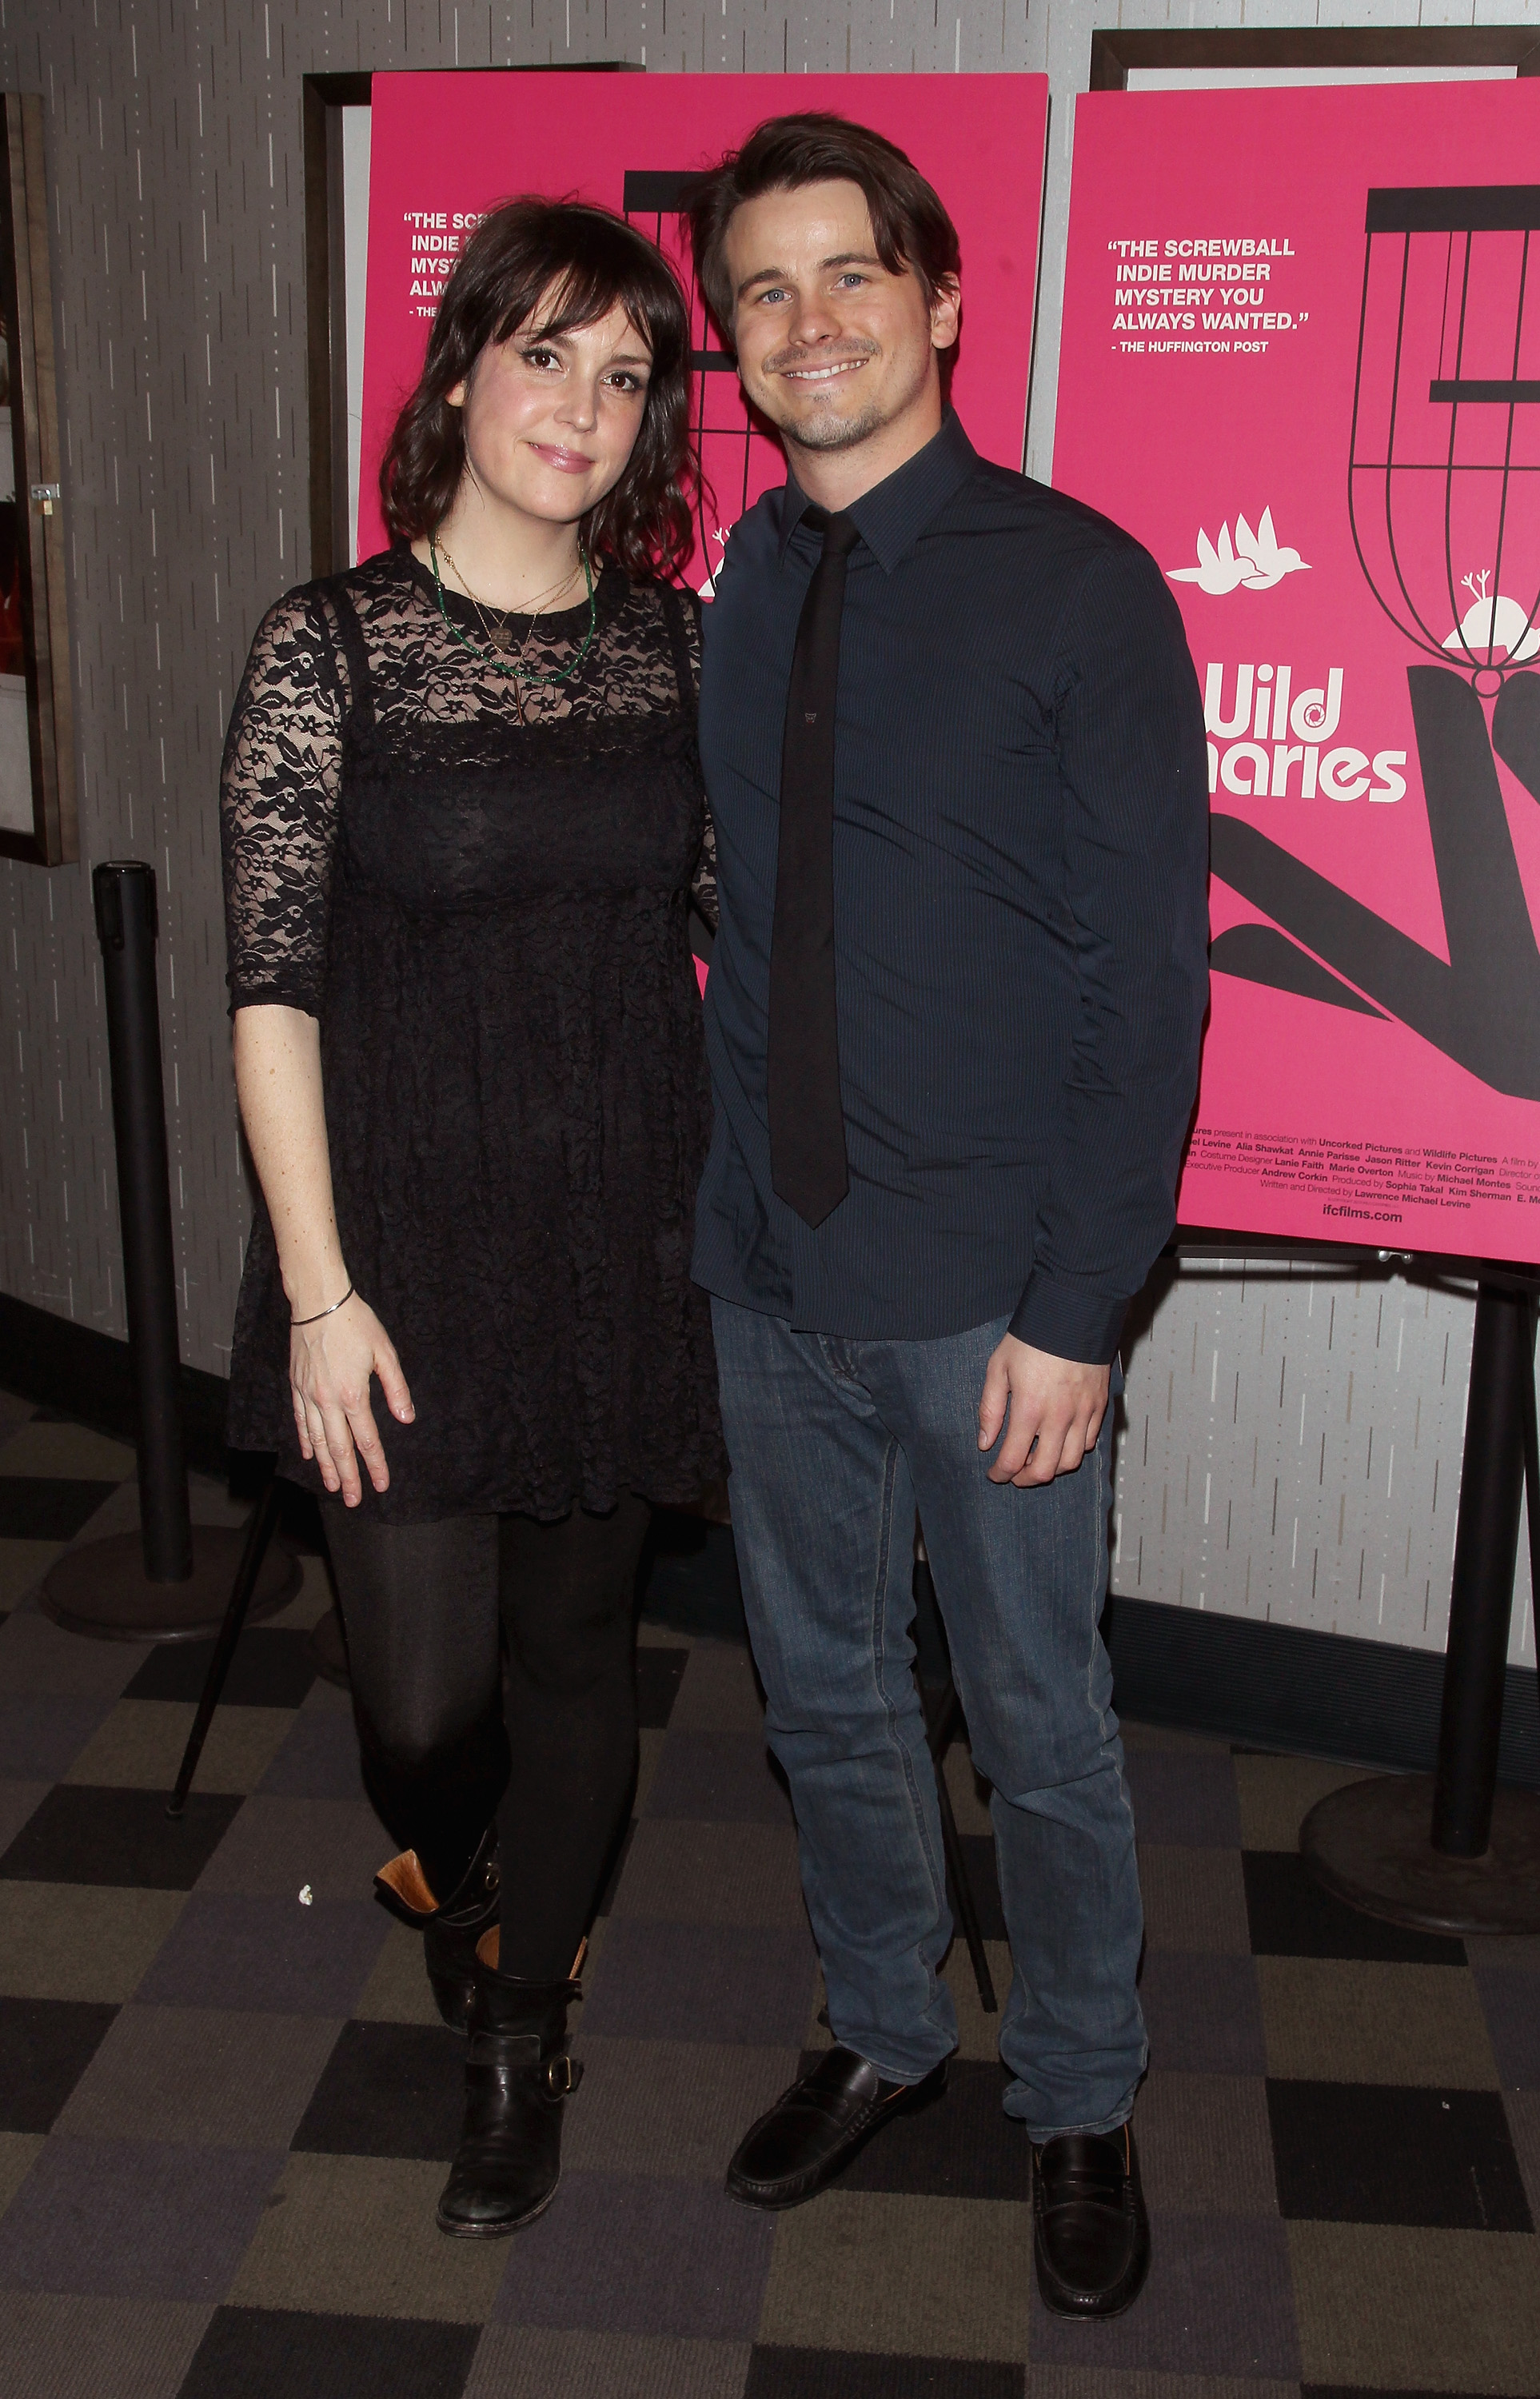 Melanie Lynskey and Jason Ritter at the "Wild Canaries" New York premiere on February 25, 2015, in New York City | Source: Getty Images